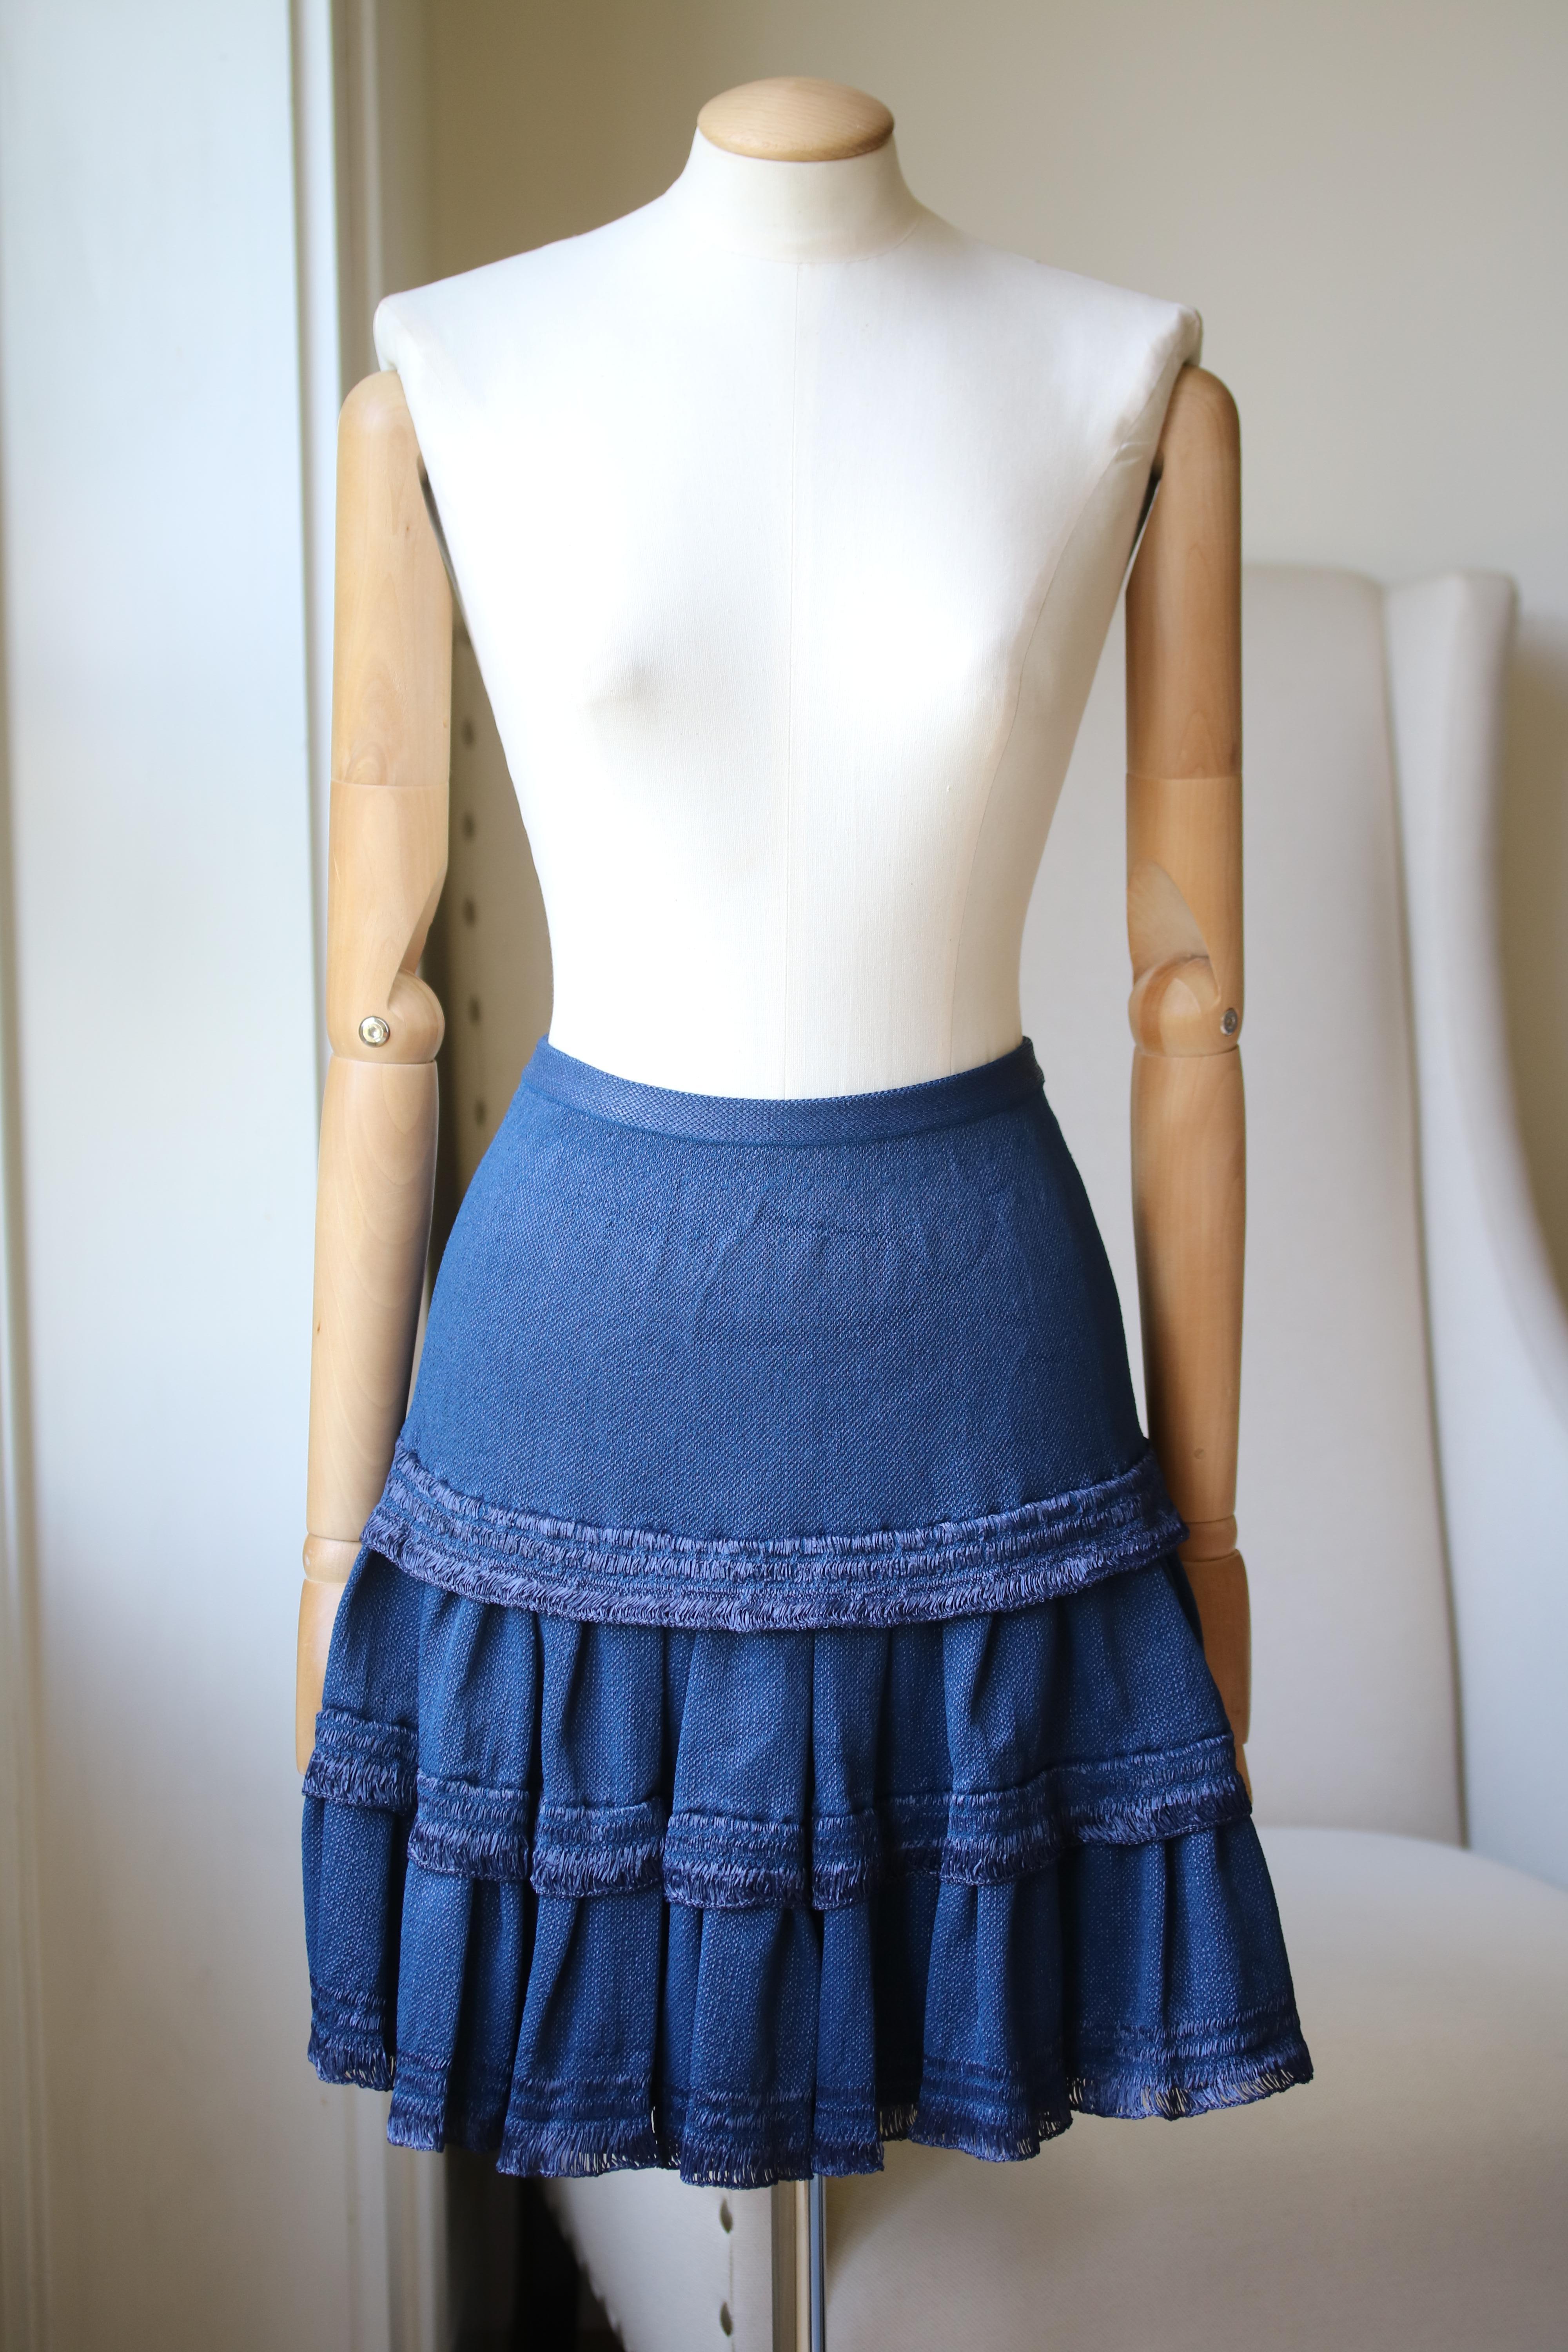 Alaïa's tiered mini skirt is made from stretch knit 90% viscose 10% polyamide with raffia trim. See separate listing for matching top.
Length 19 inches.
Made in Italy.

Size: FR 40 (UK 12, US 8, IT 44)

Condition: As new condition, no sign of wear. 